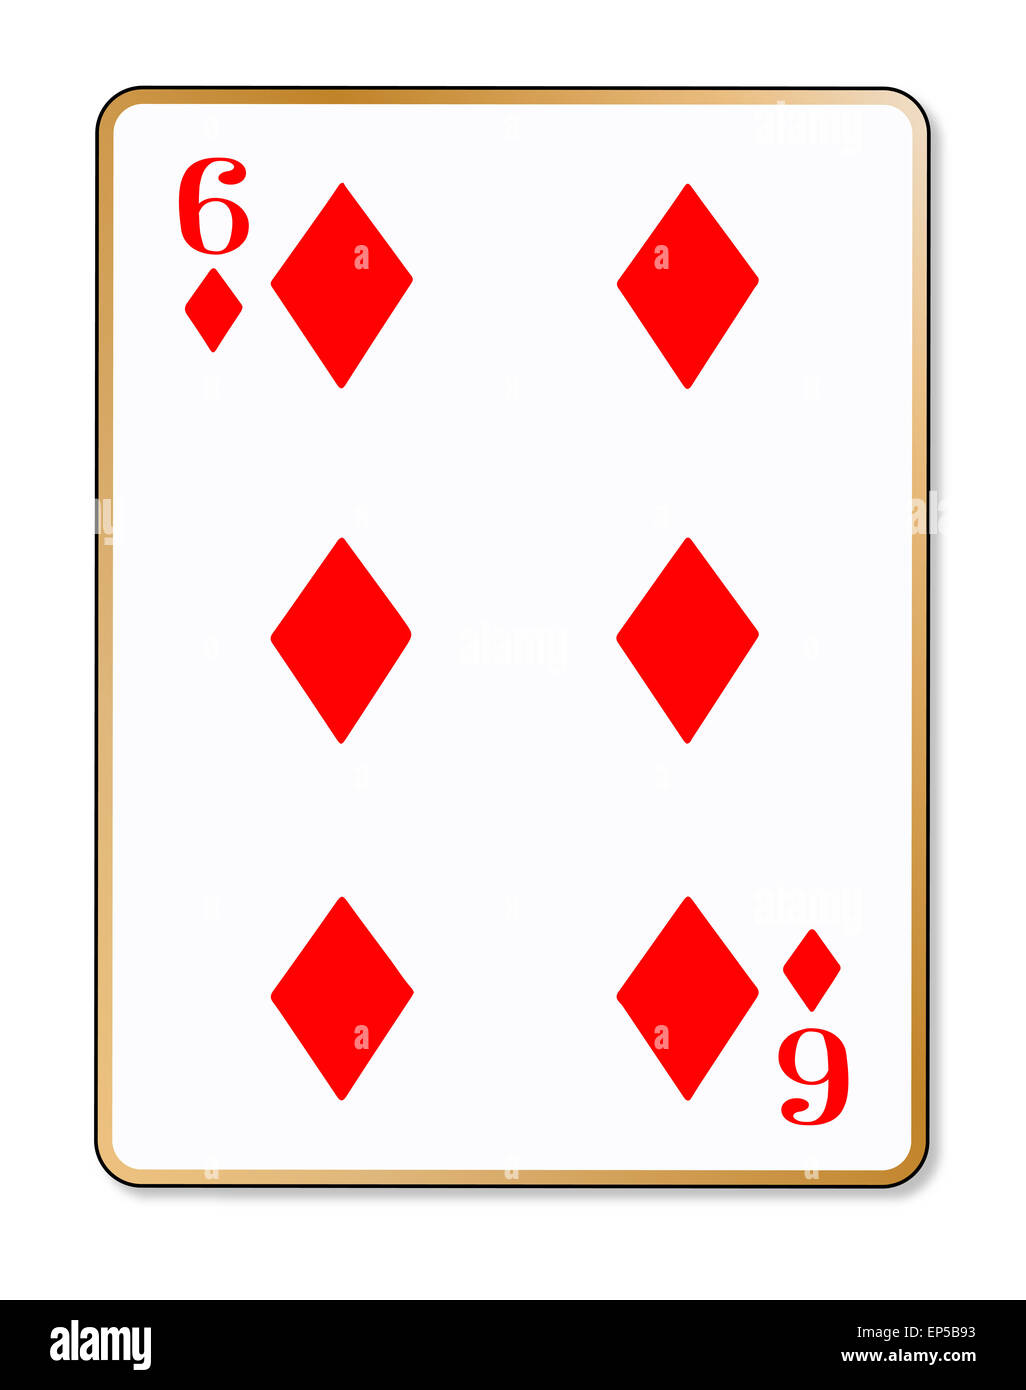 The playing card the six of diamonds over a white background Stock Photo